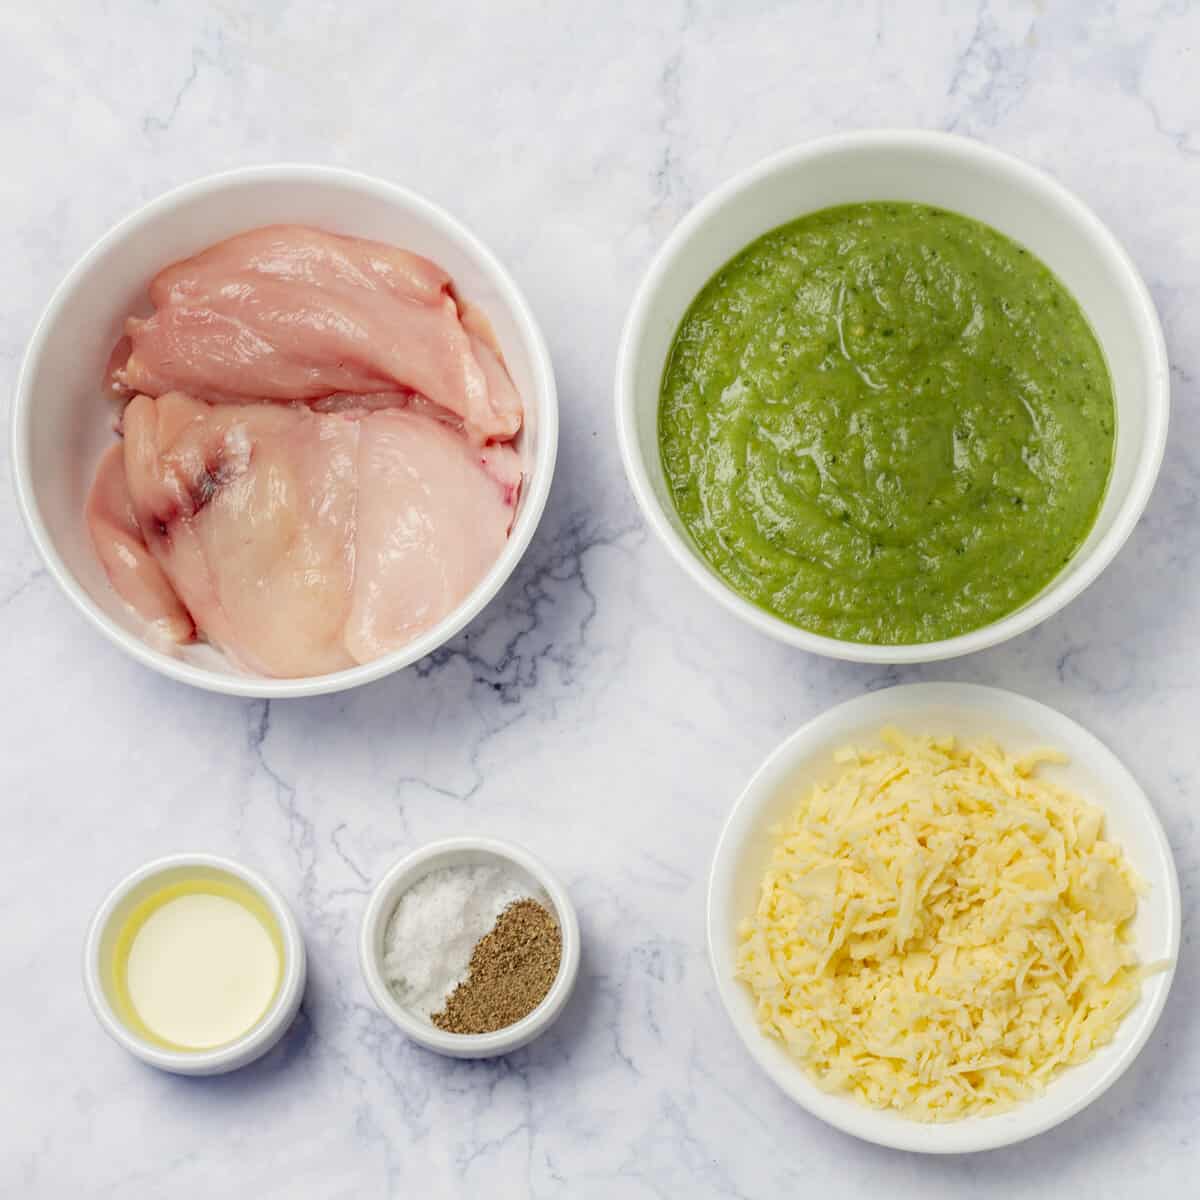 Ingredients of raw chicken breast, salsa verde sauce, mozzarella cheese, and seasonings in separate dishes. 